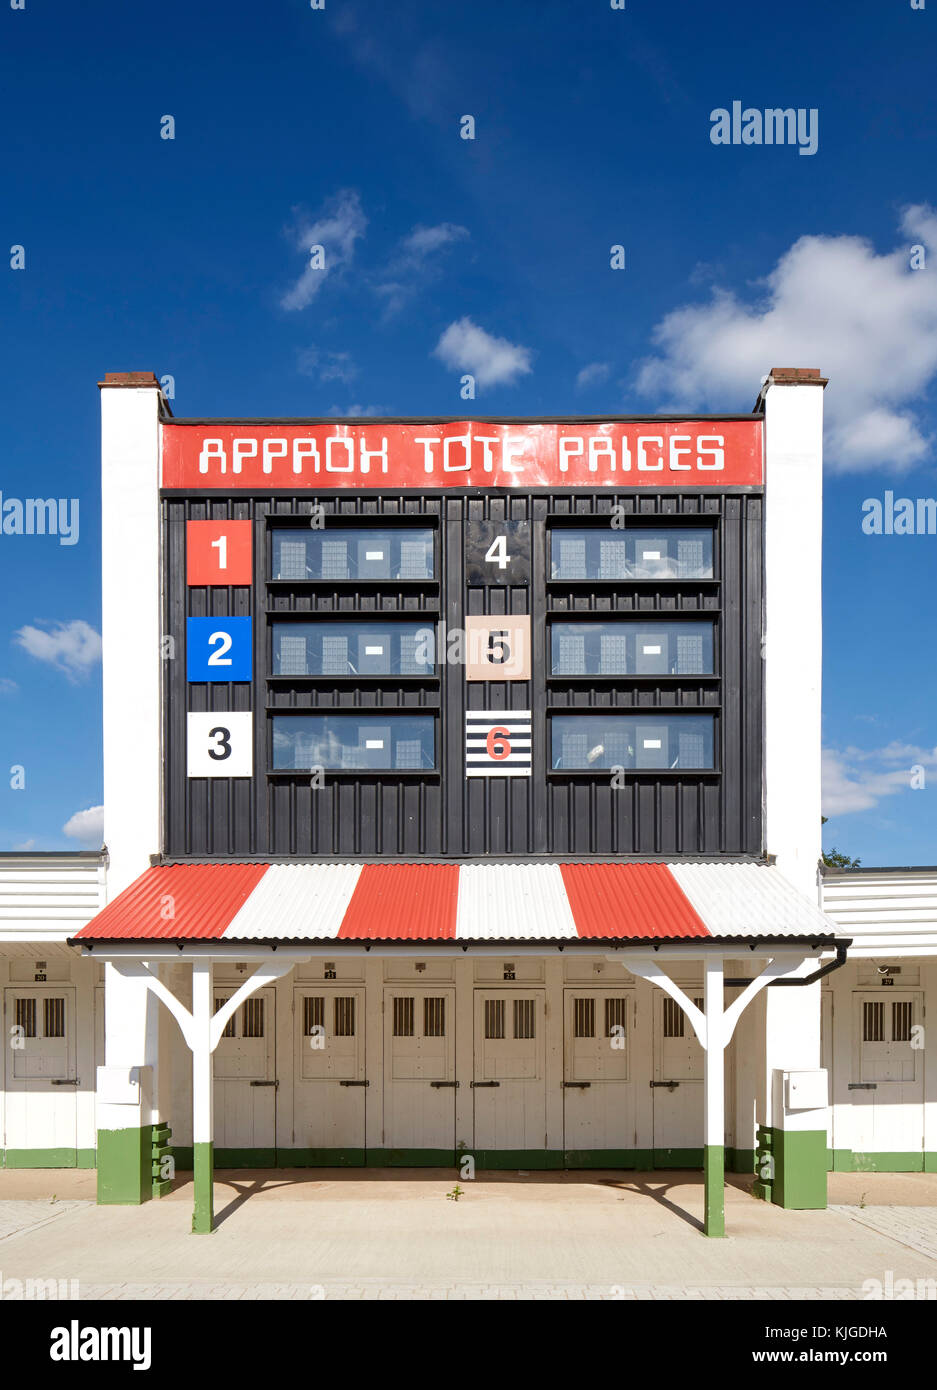 View of Tote board. Originally used to display betting odds / prices. Walthamstow Stadium Housing development, Walthamstow, United Kingdom. Architect: Stock Photo